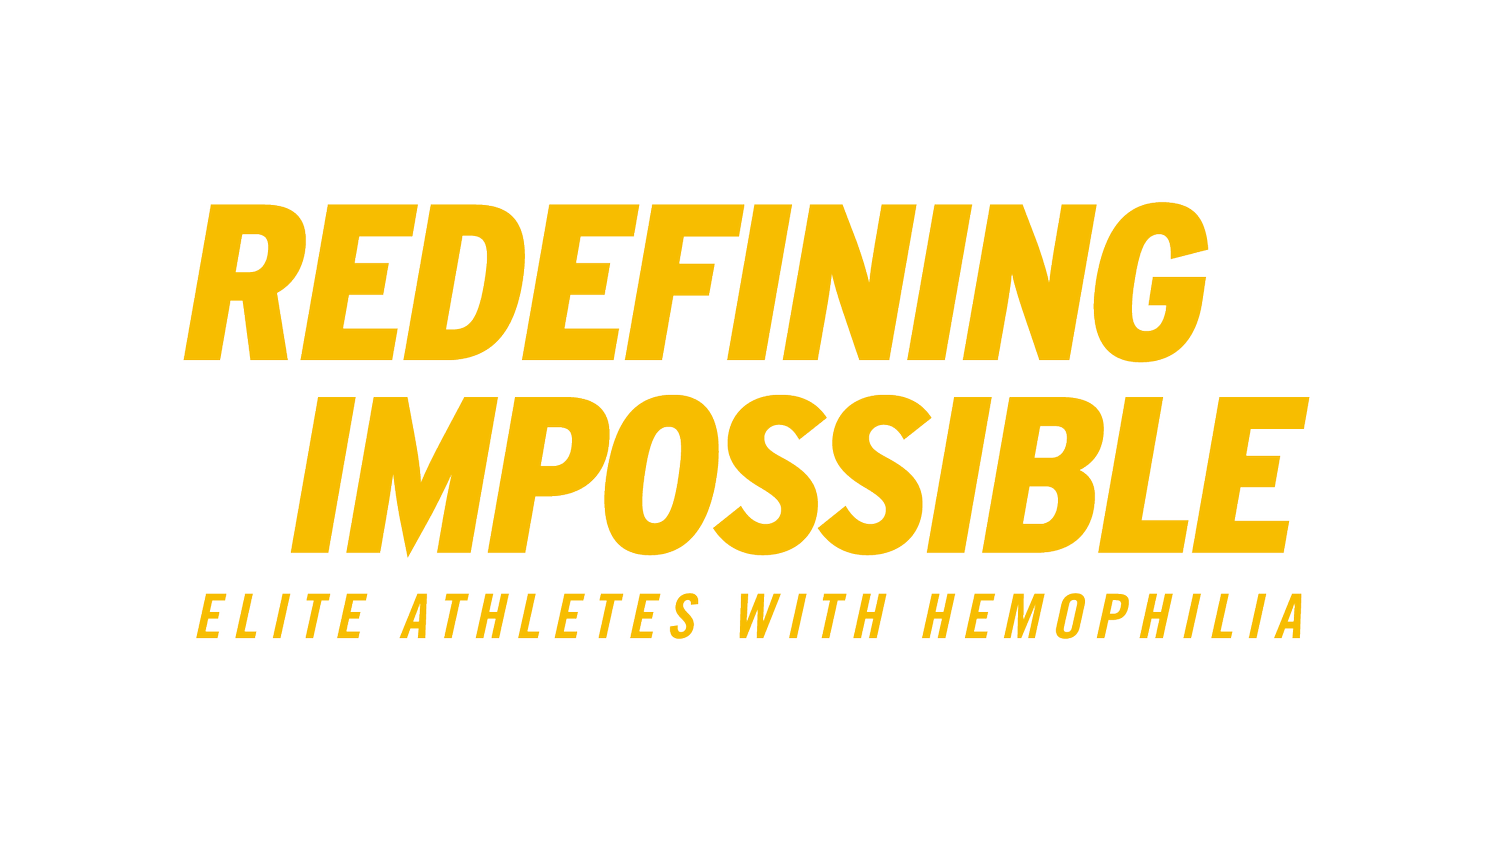 REDEFINING IMPOSSIBLE